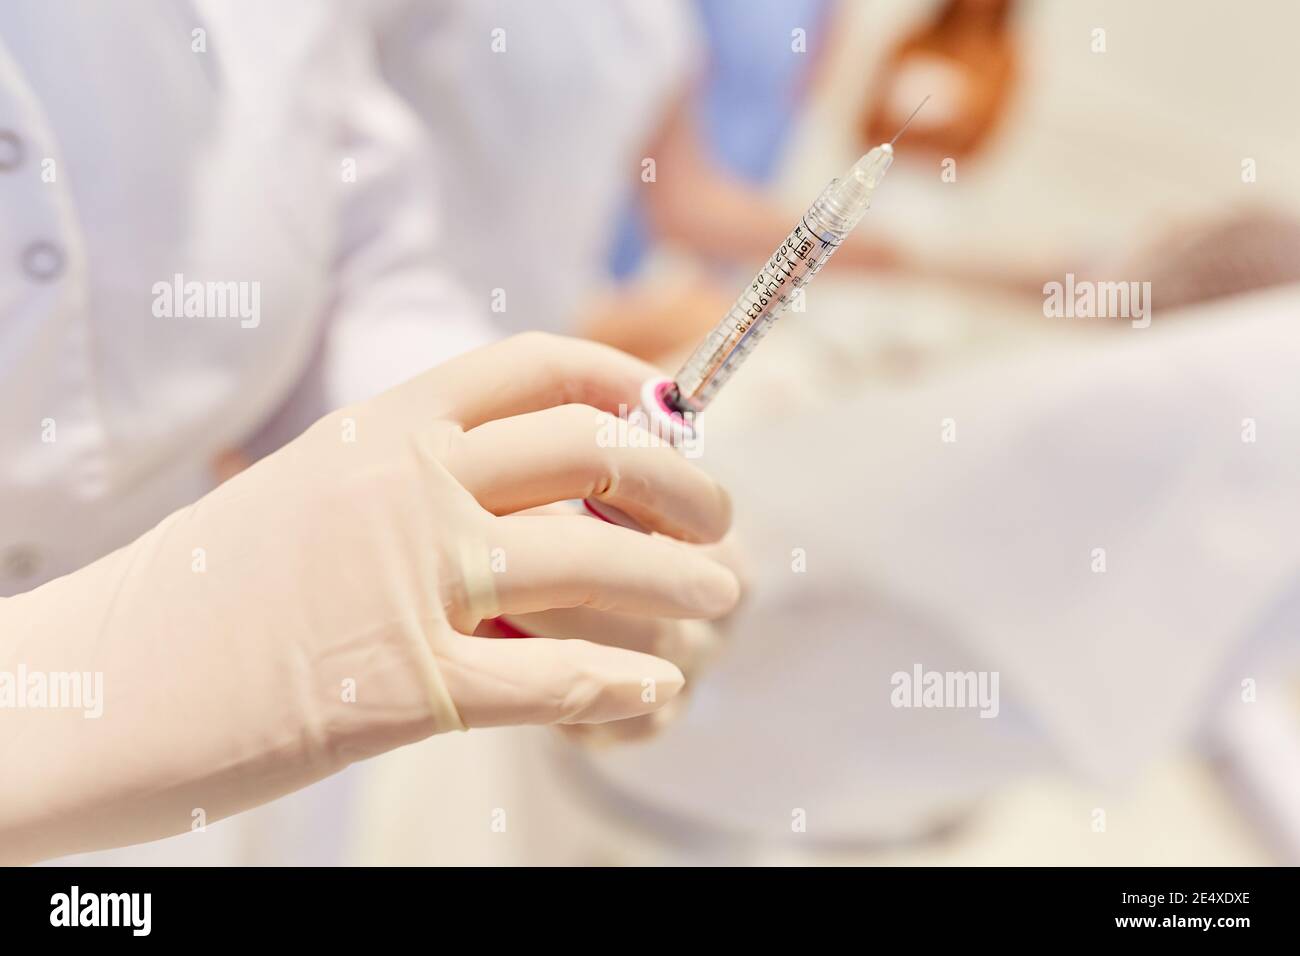 Hand in disposable glove holds syringe with hyaluronic acid for wrinkle injection Stock Photo